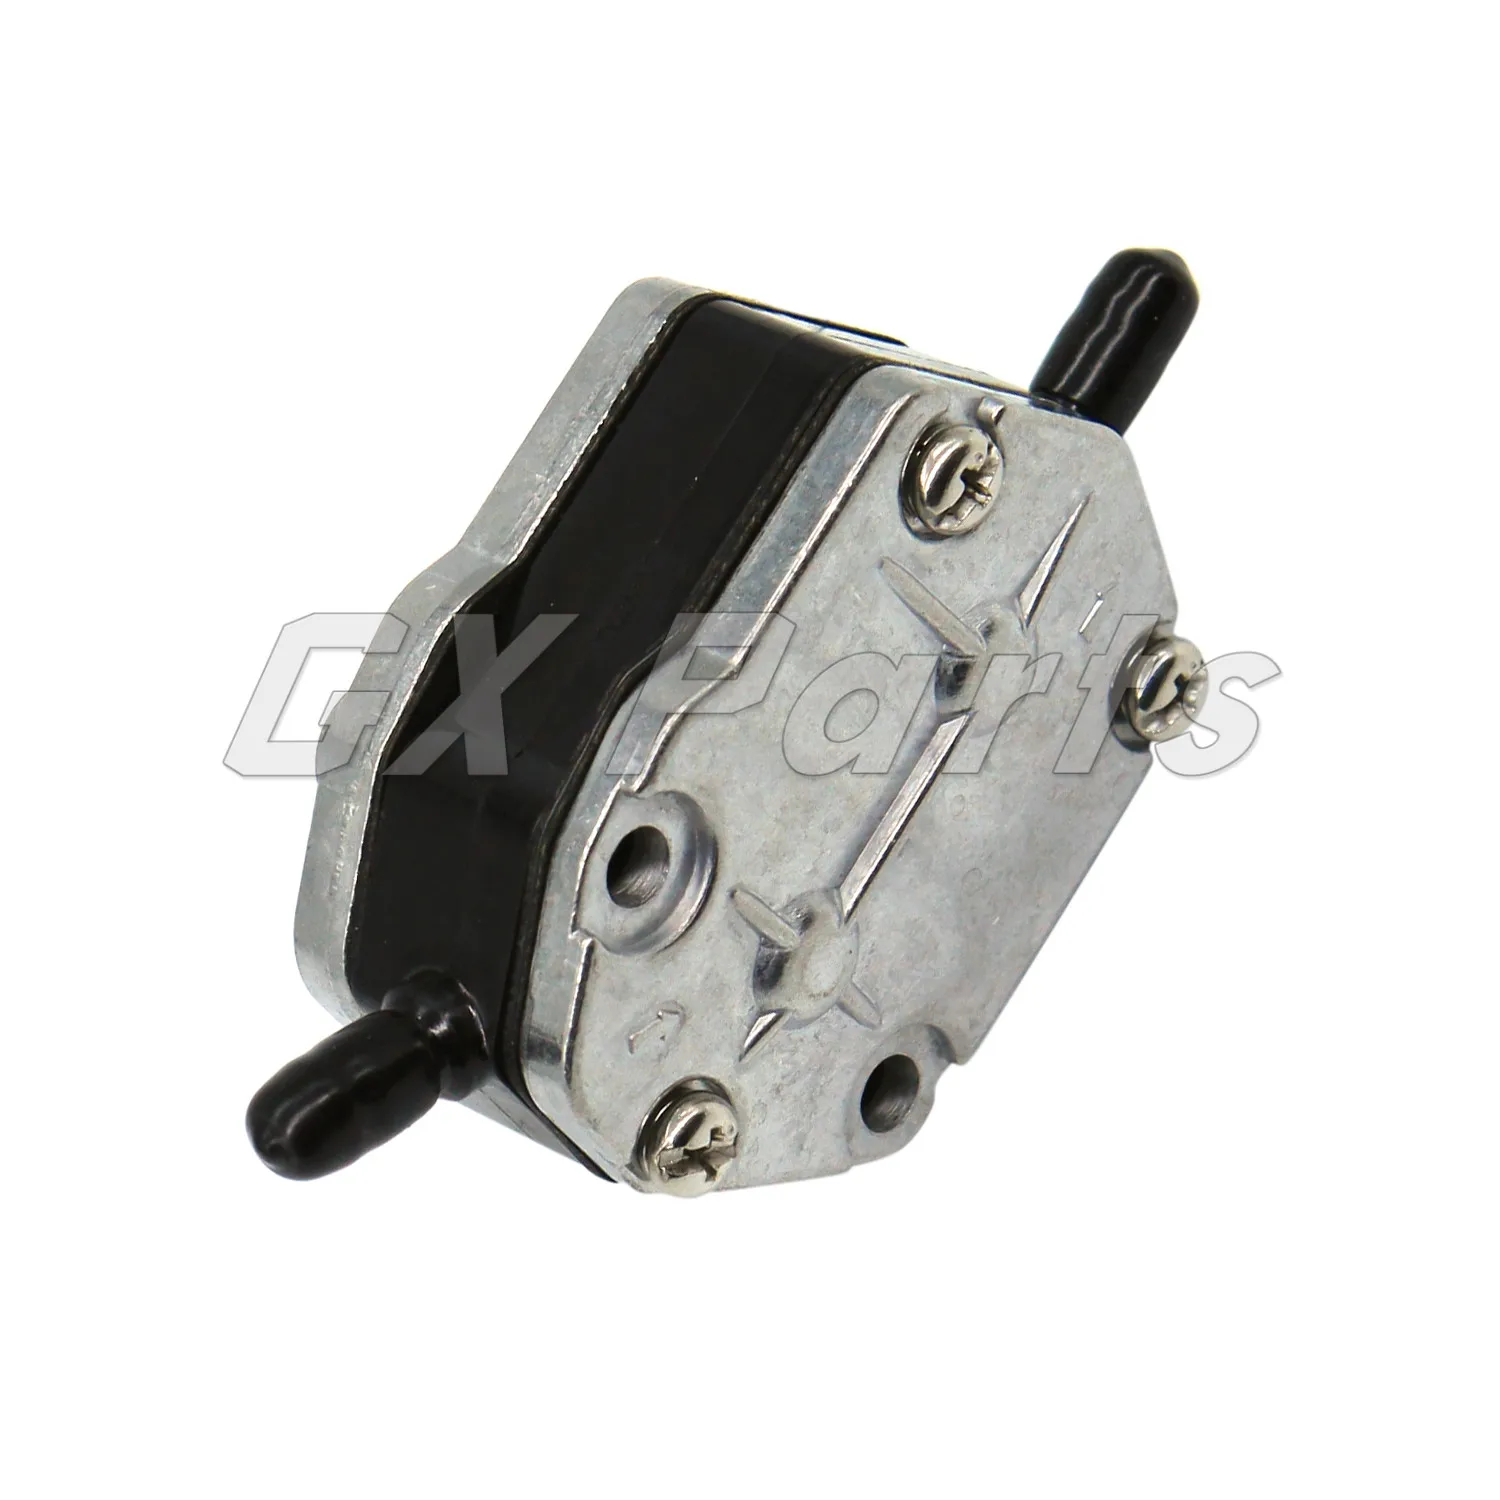 90HP Outboard Motor Boat Engine Fuel Pump 15100-94310 15100-94303 for Suzuki DT9.9 DT20 DT25 DT30 DT35 DT40 DT50 DT55 DT60 DT65 20HP 